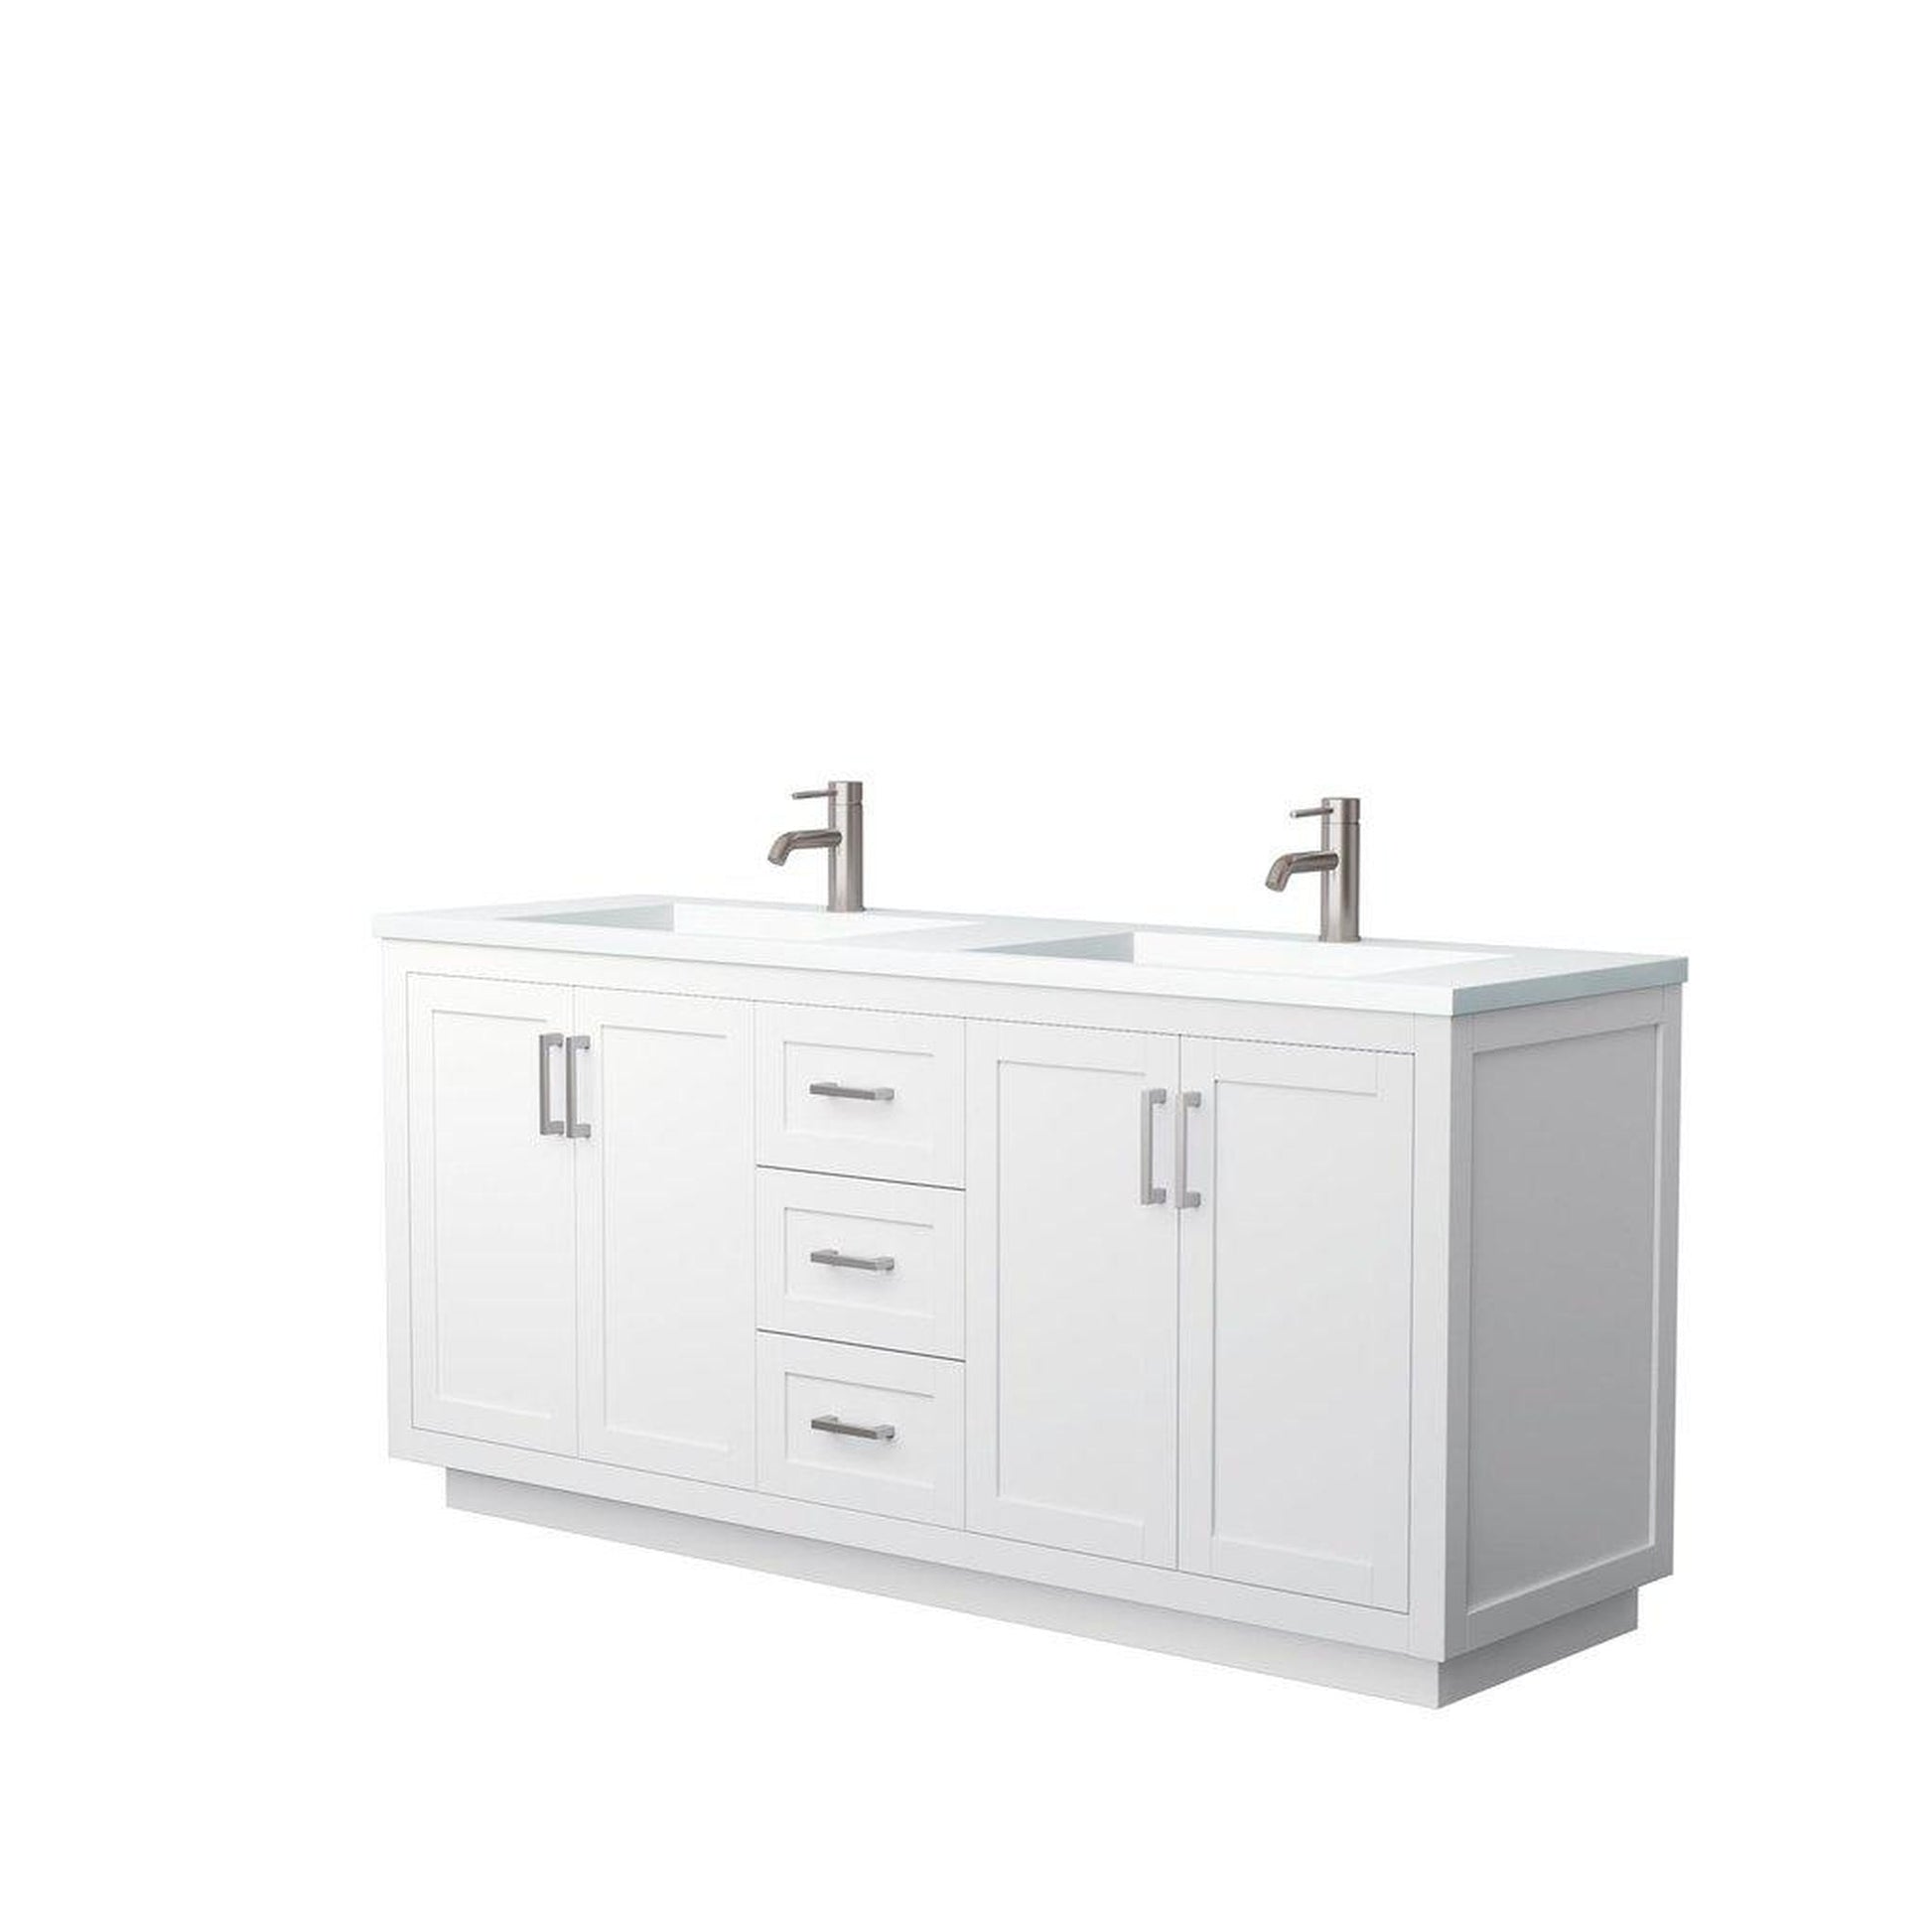 Wyndham Collection Miranda 72" Double Bathroom White Vanity Set With 1.25" Thick Matte White Solid Surface Countertop, Integrated Sink, And Brushed Nickel Trim